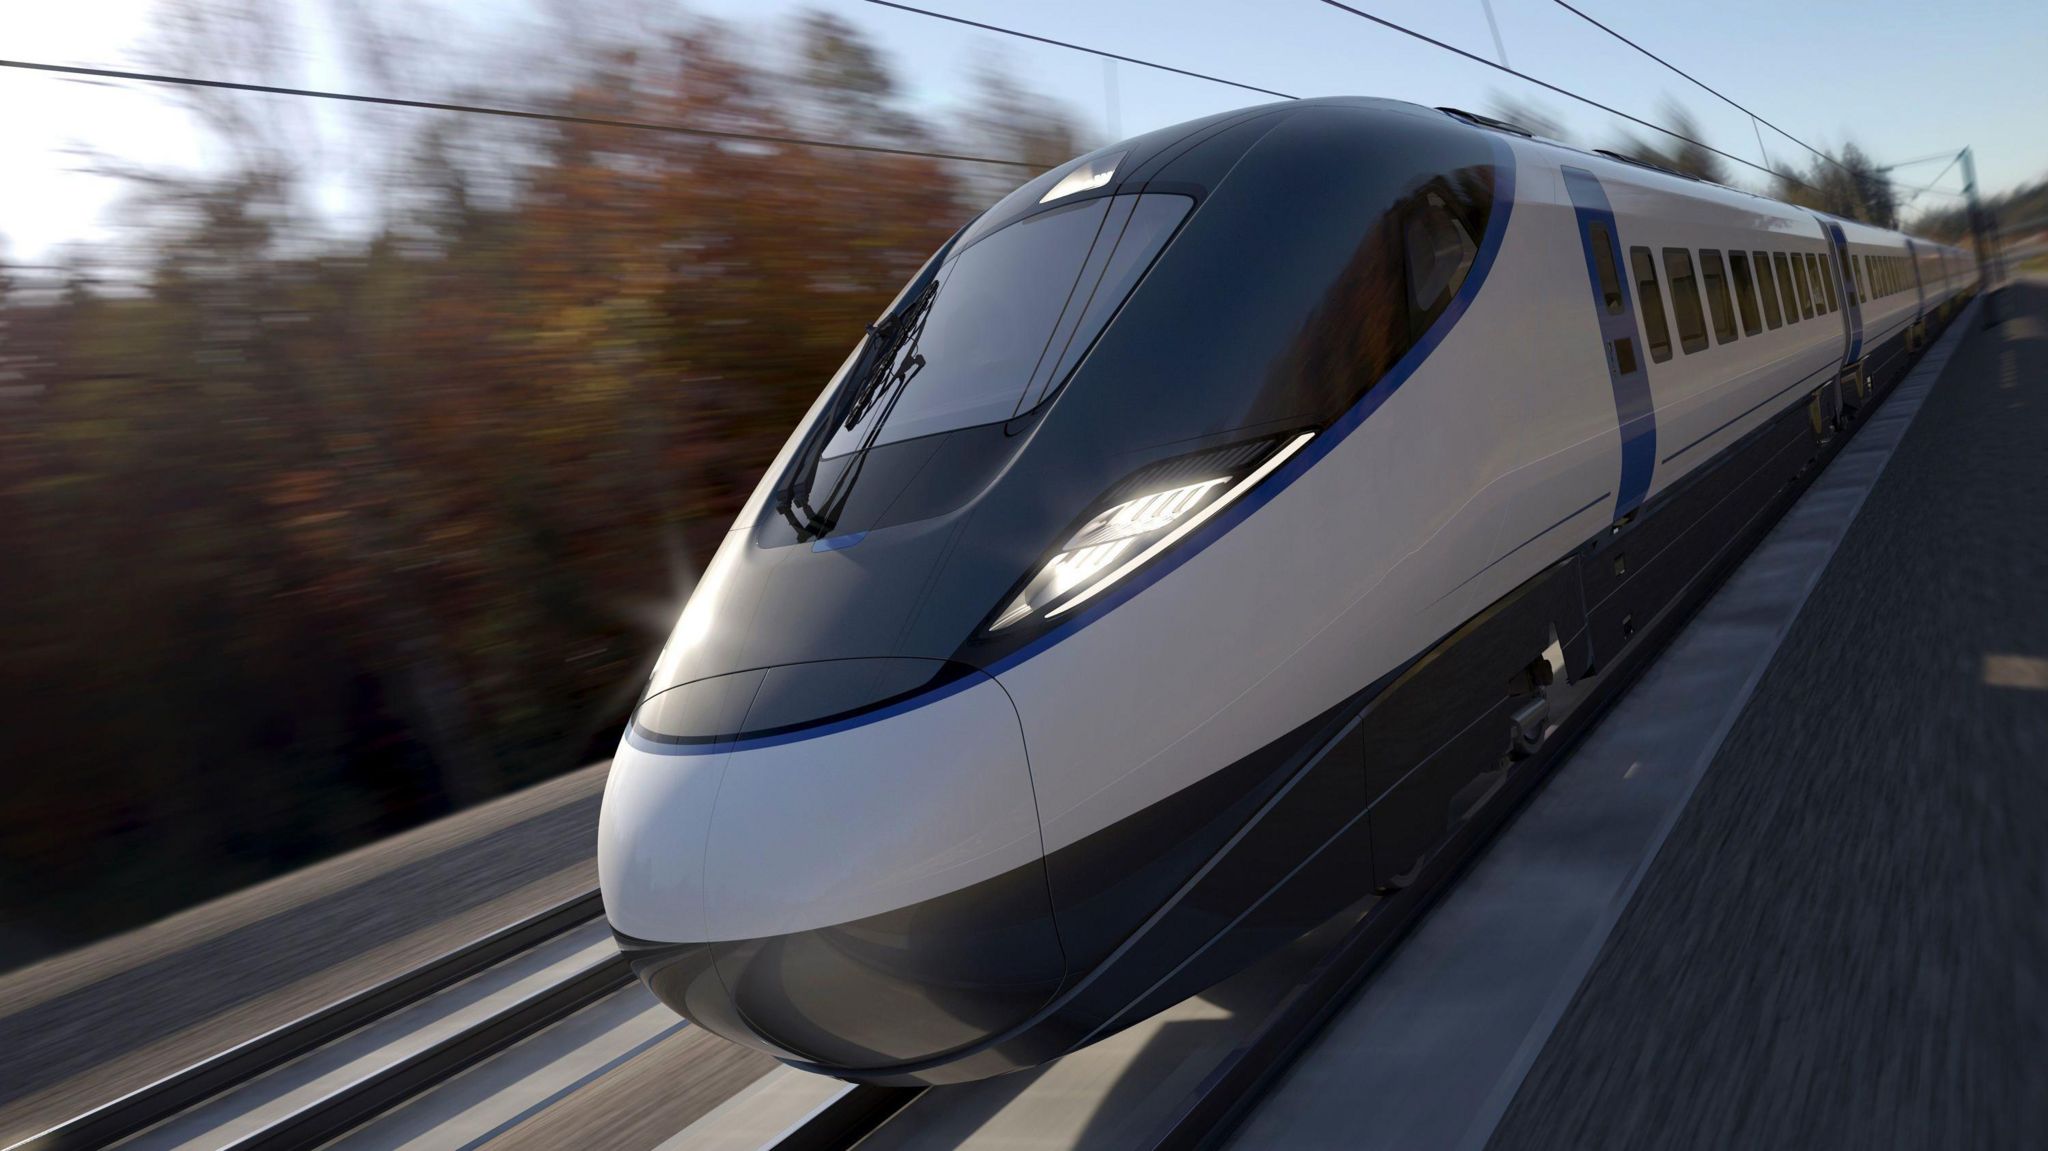 An artist impression of a early visualisation of a HS2 train. It shows a white and blue train on a line travelling past trees. 